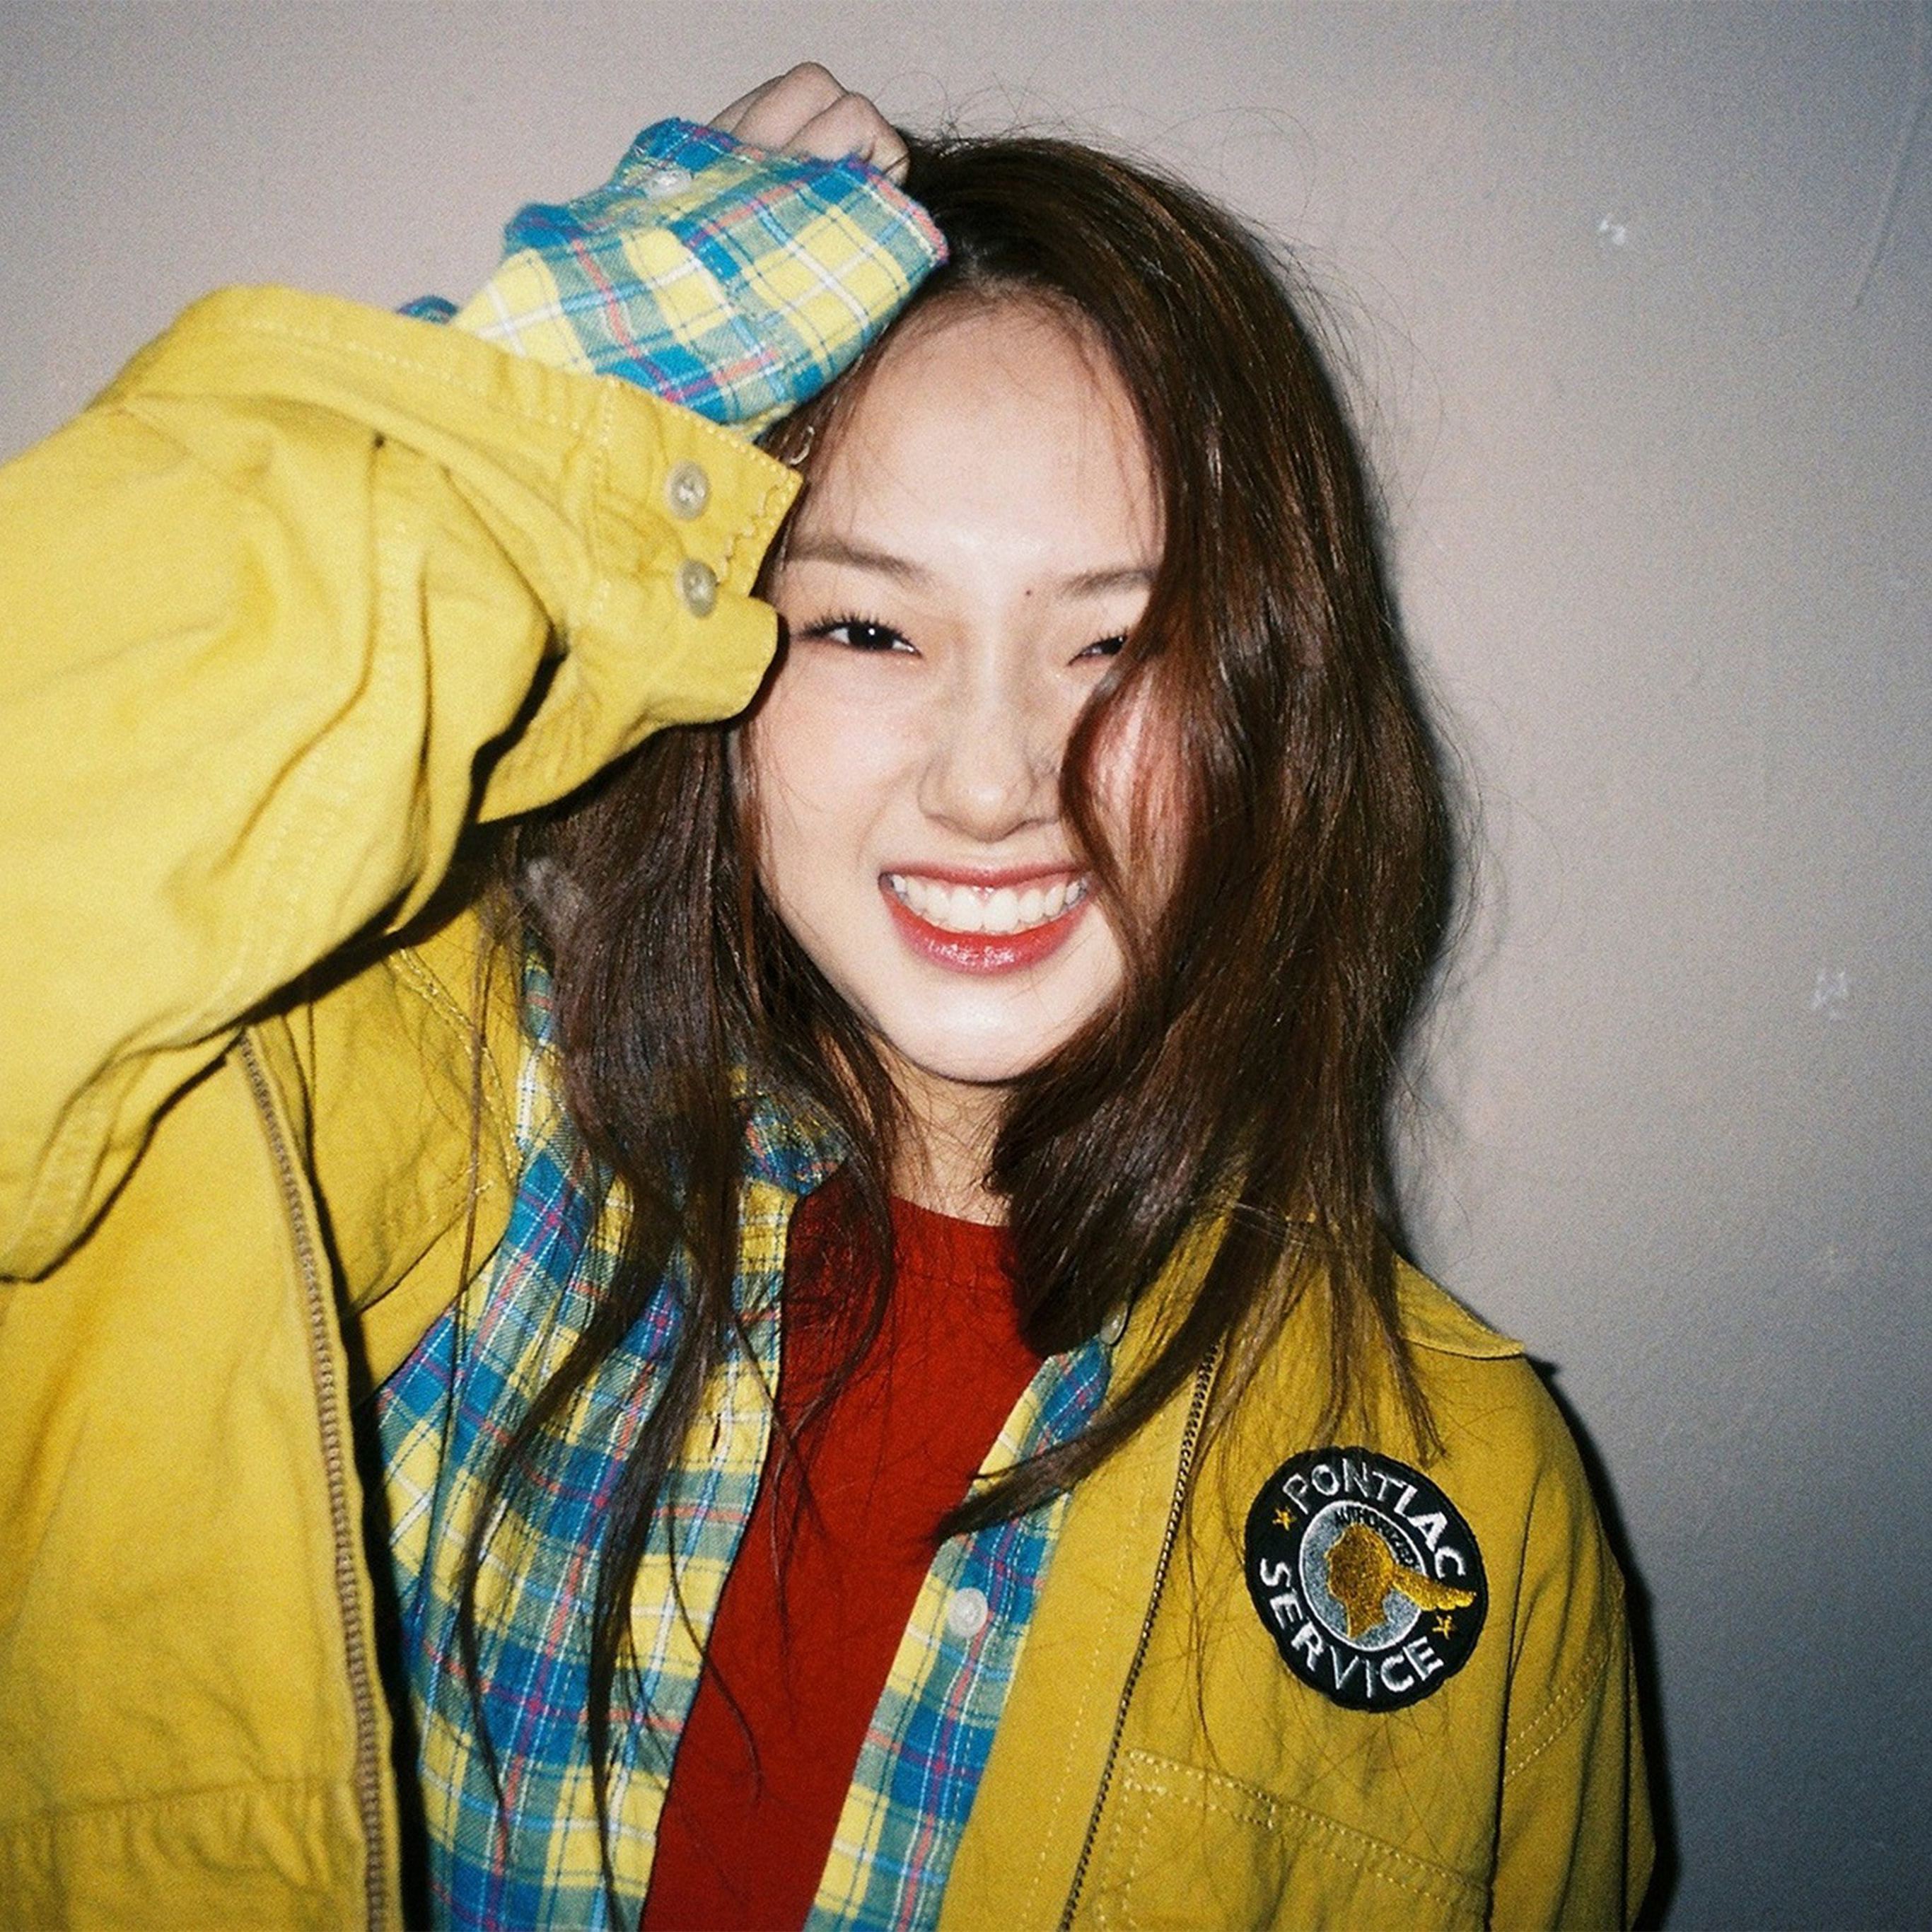 A woman wearing a yellow jacket and a red shirt smiling at the camera - Korean